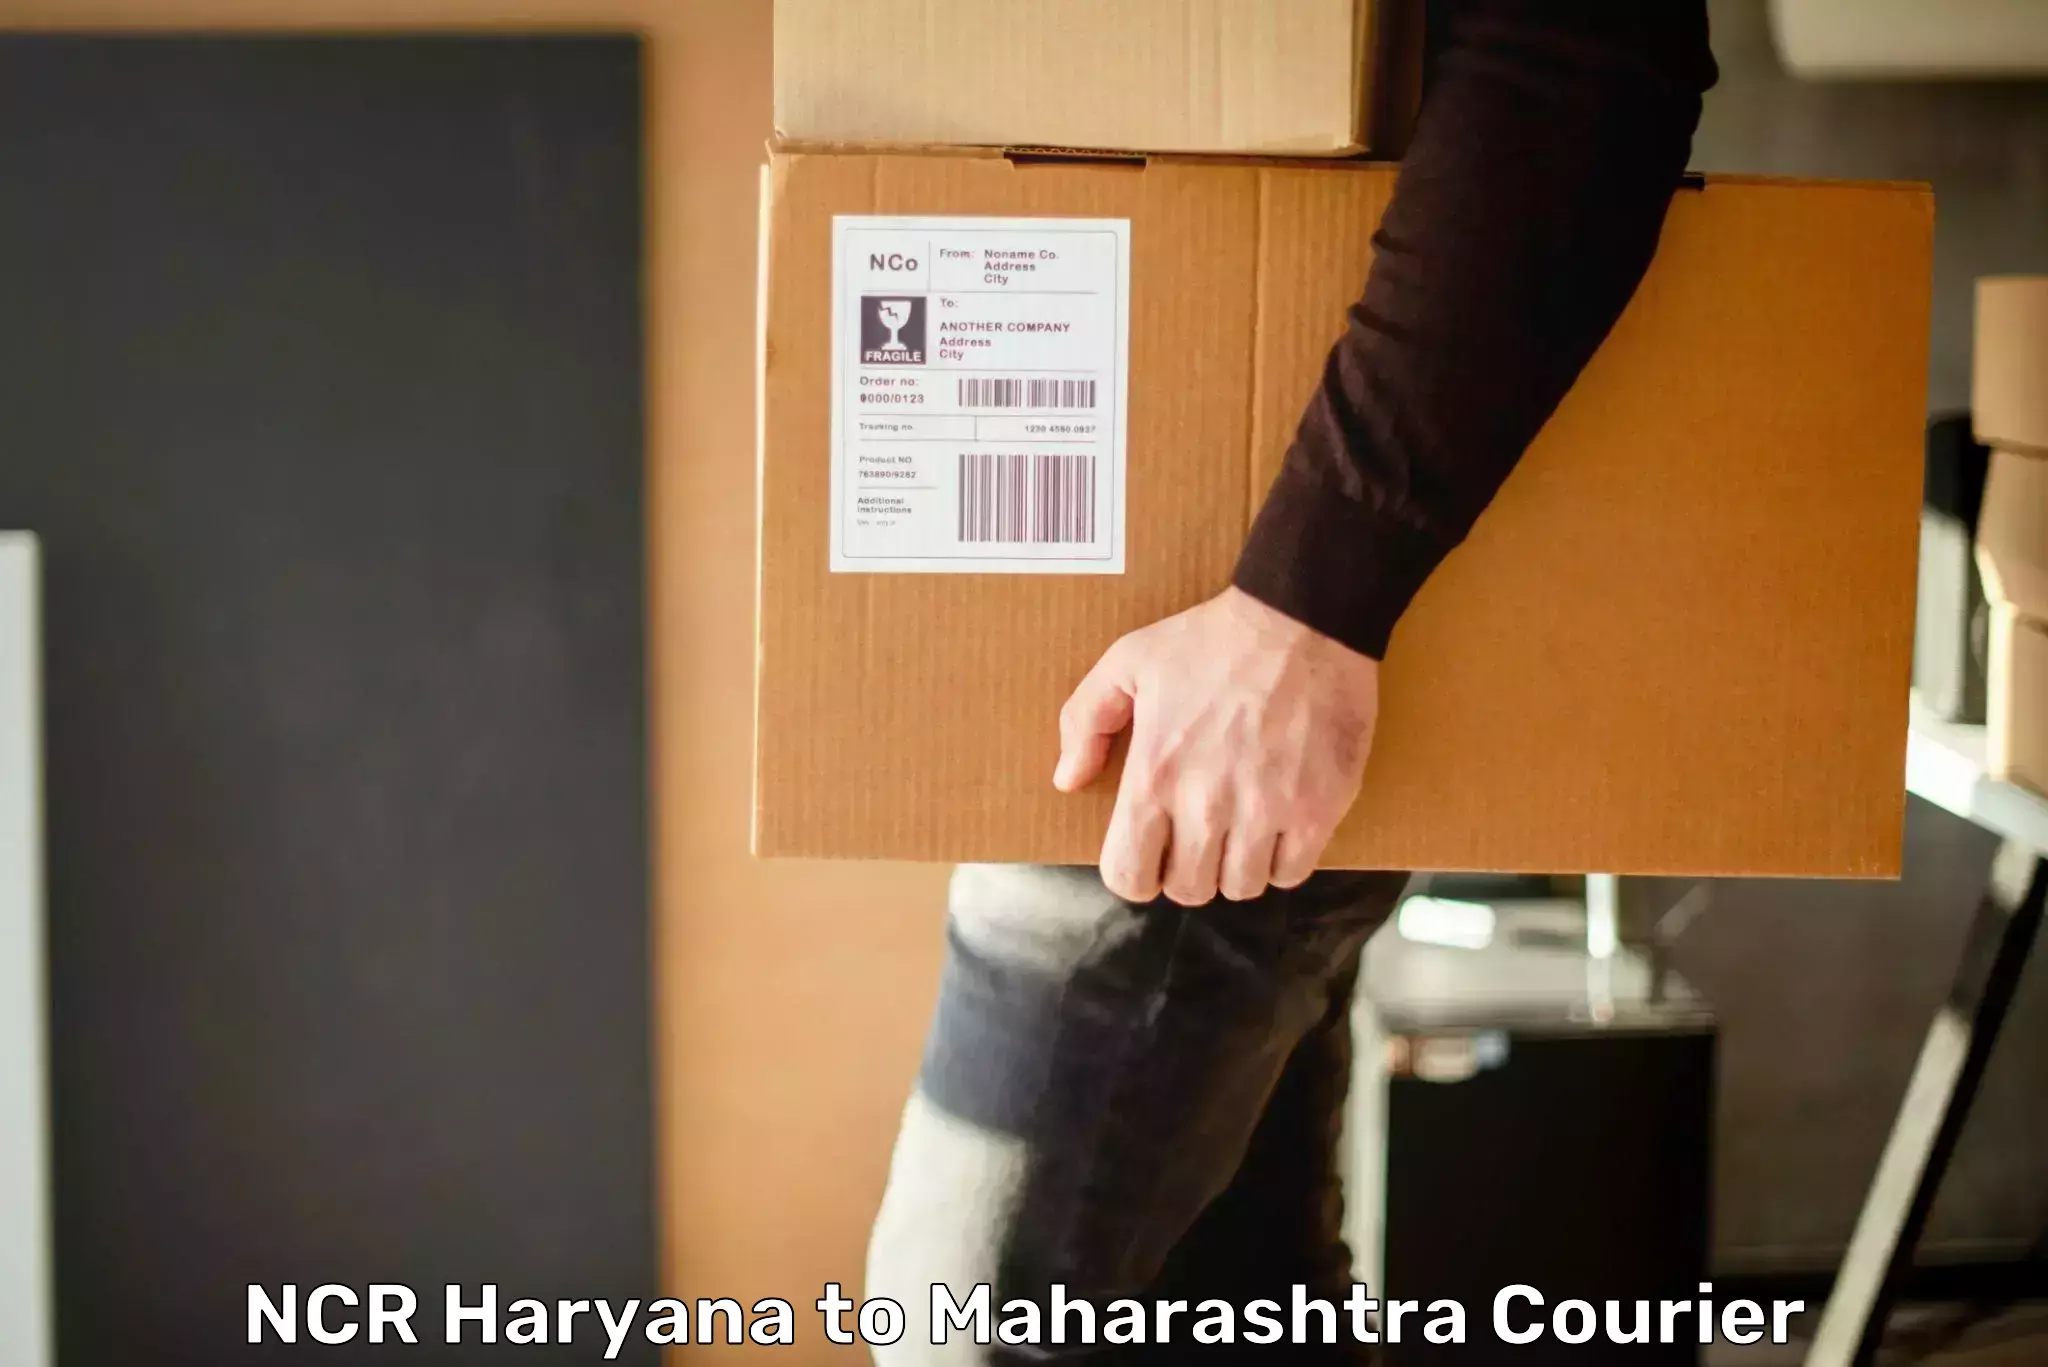 Courier service booking NCR Haryana to Lonikand